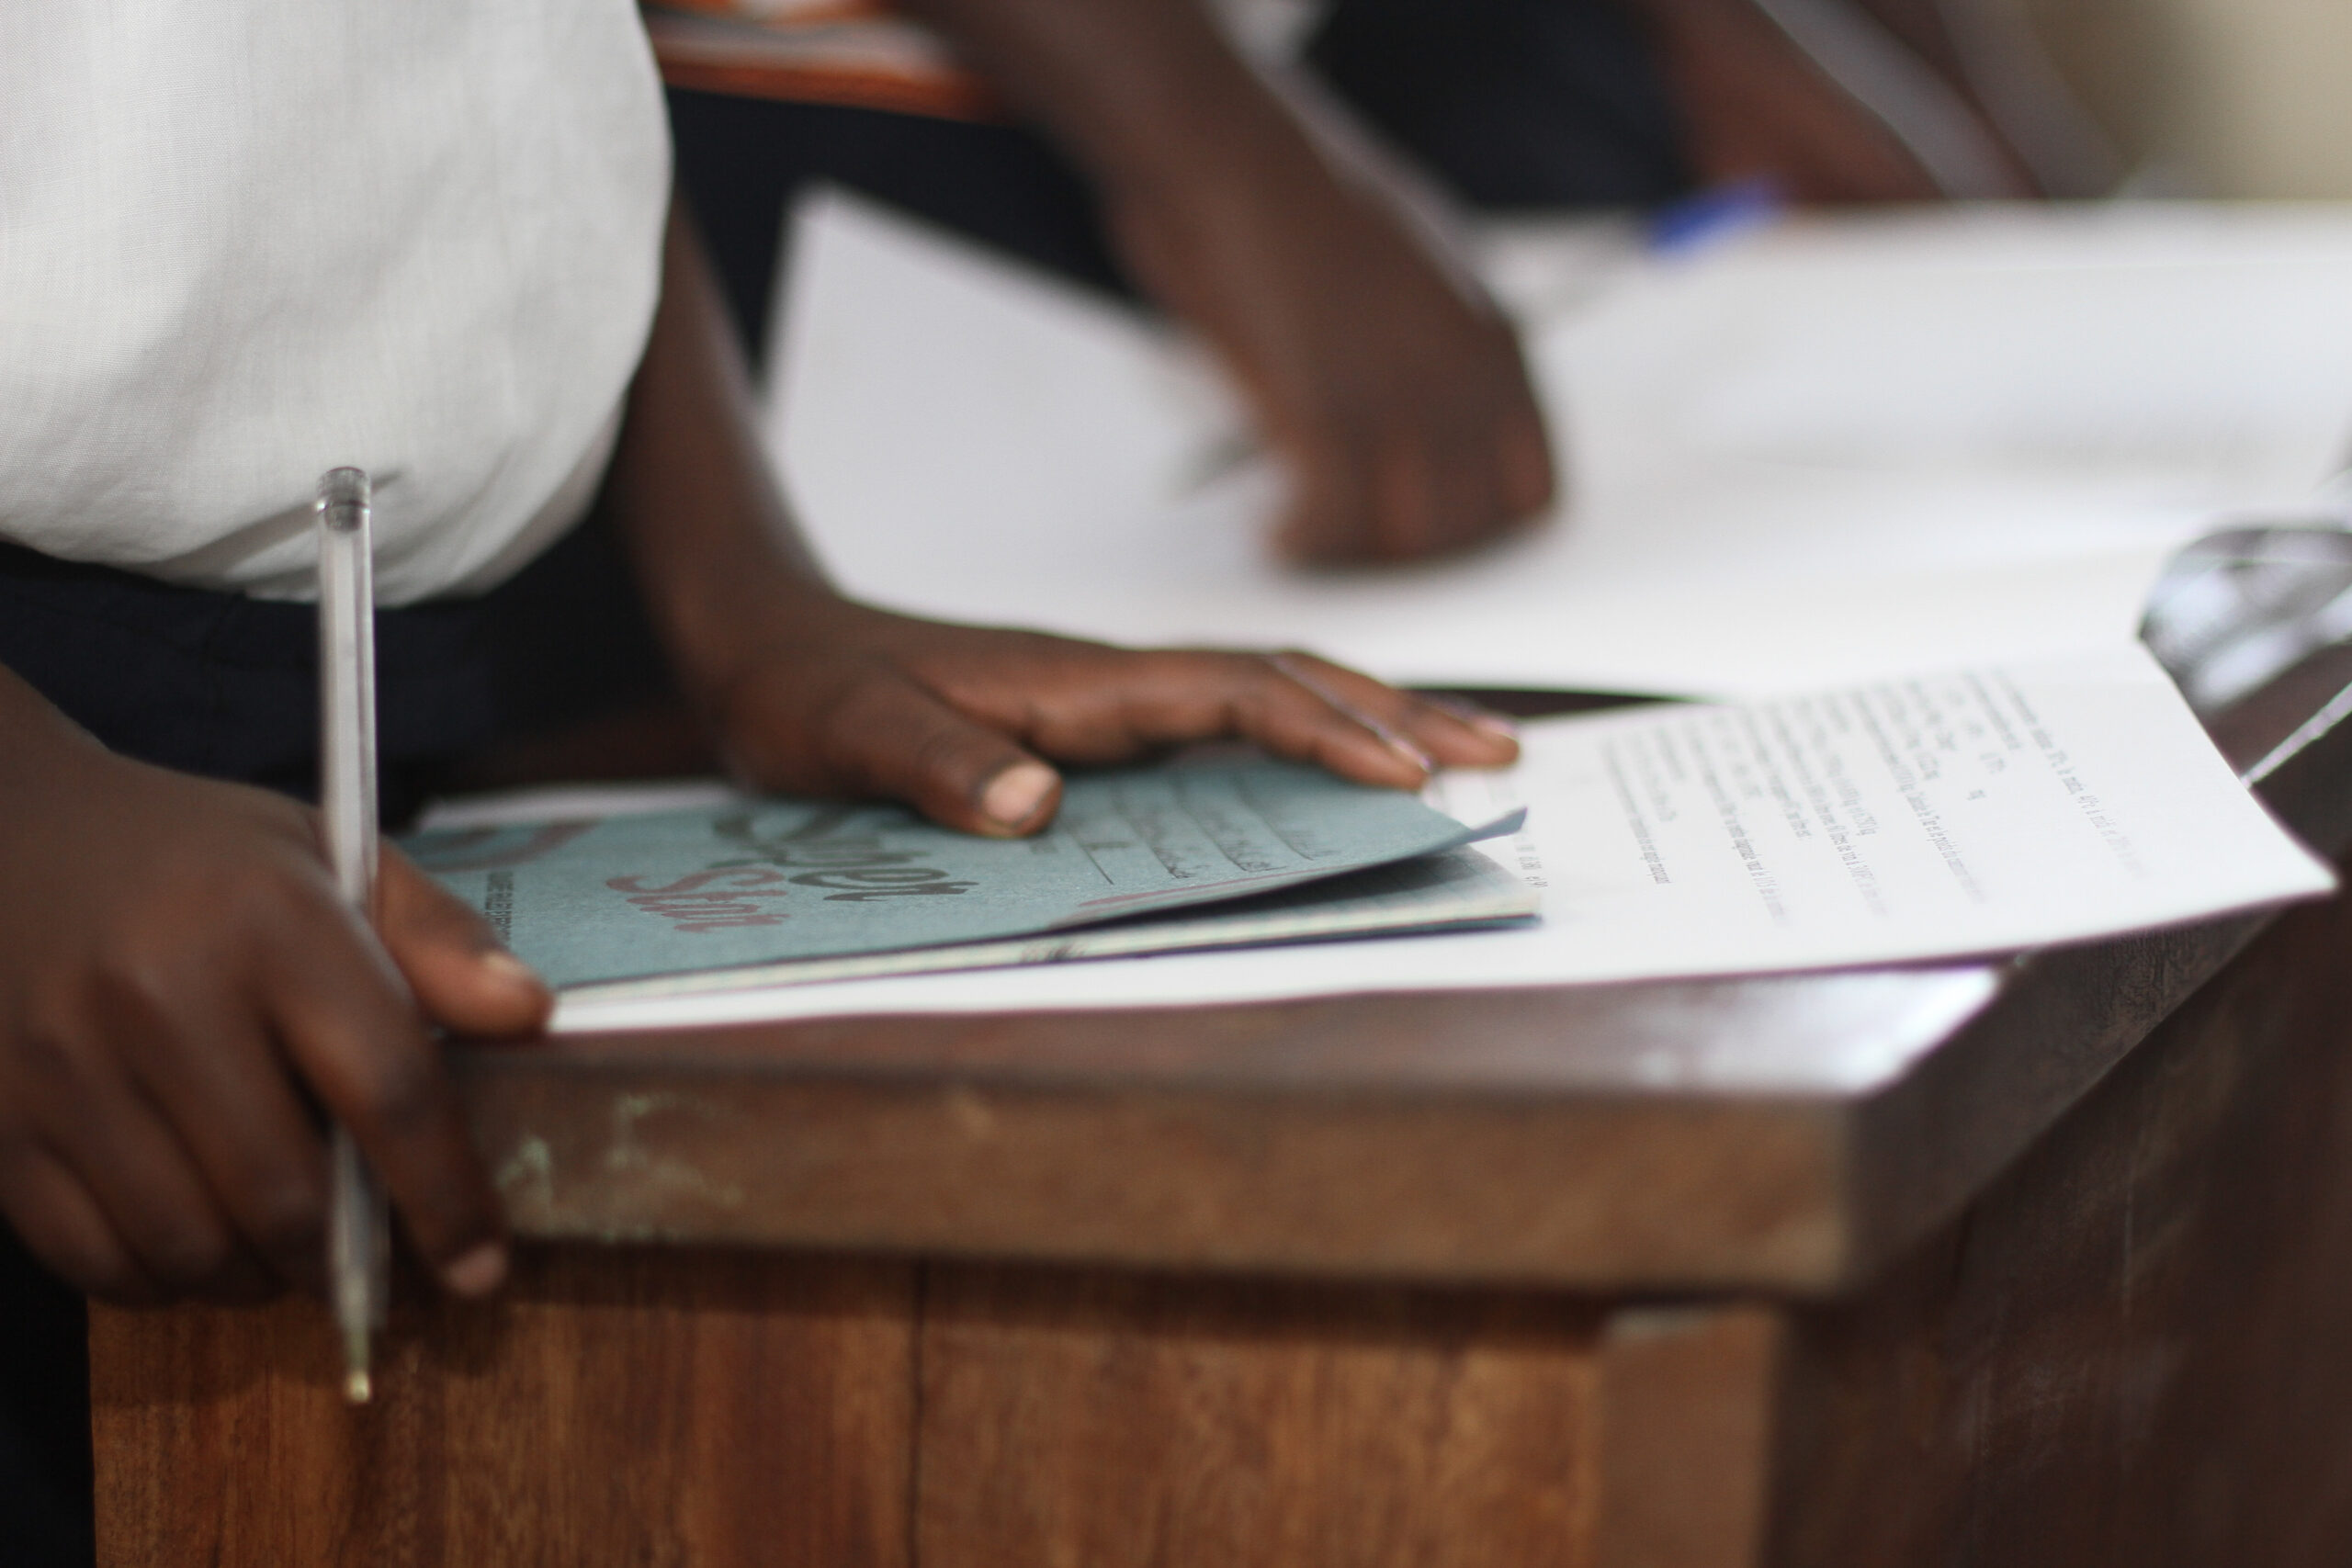 A book on a wooden desk. The child is holding a pen over the book